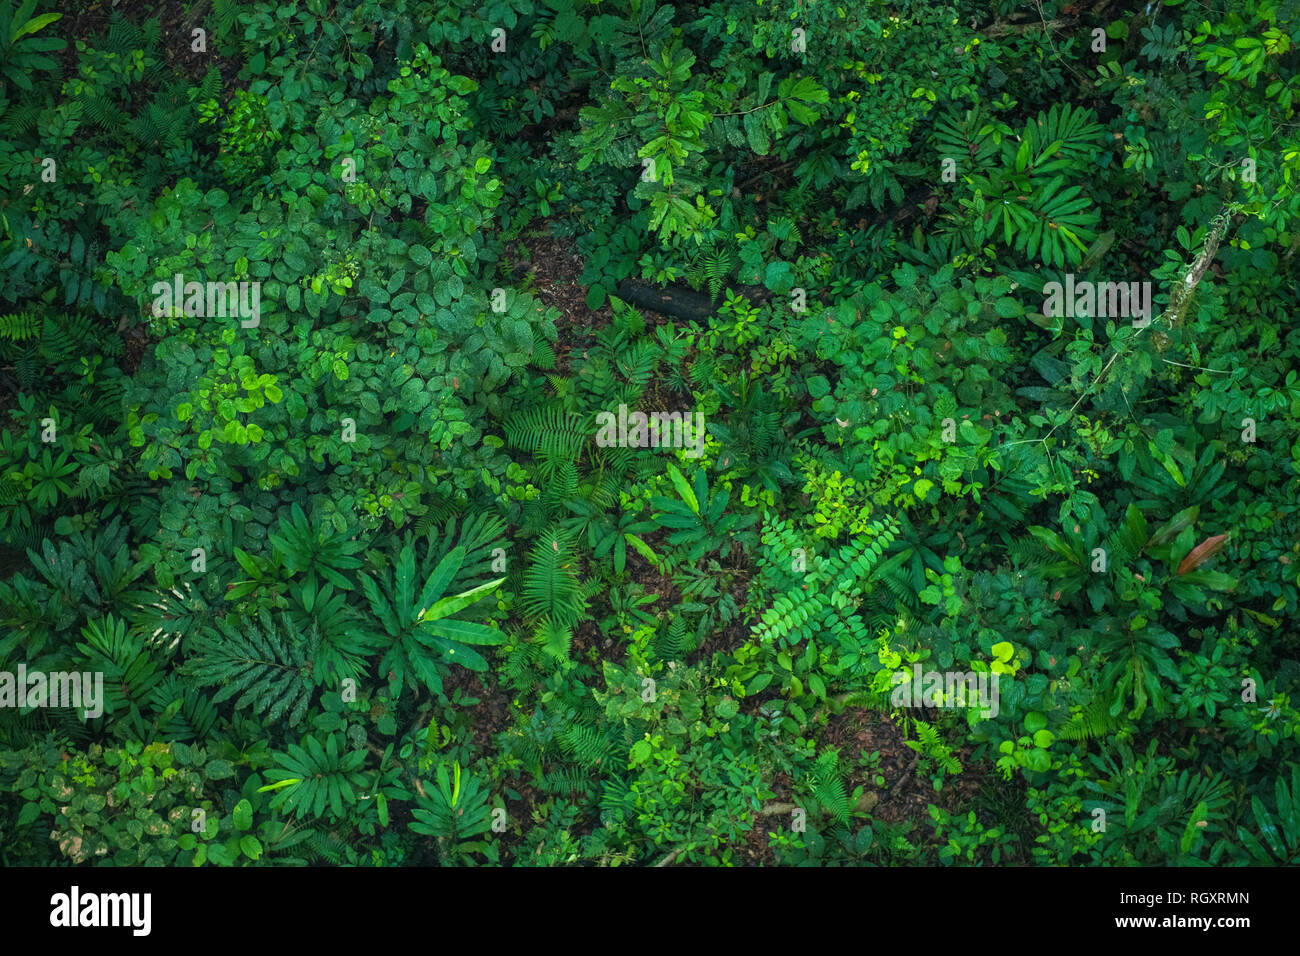 Dense, lush green rainforest foliage viewed from above in Danum Valley Rainforest, Sabah, Borneo, Malaysia. Stock Photo